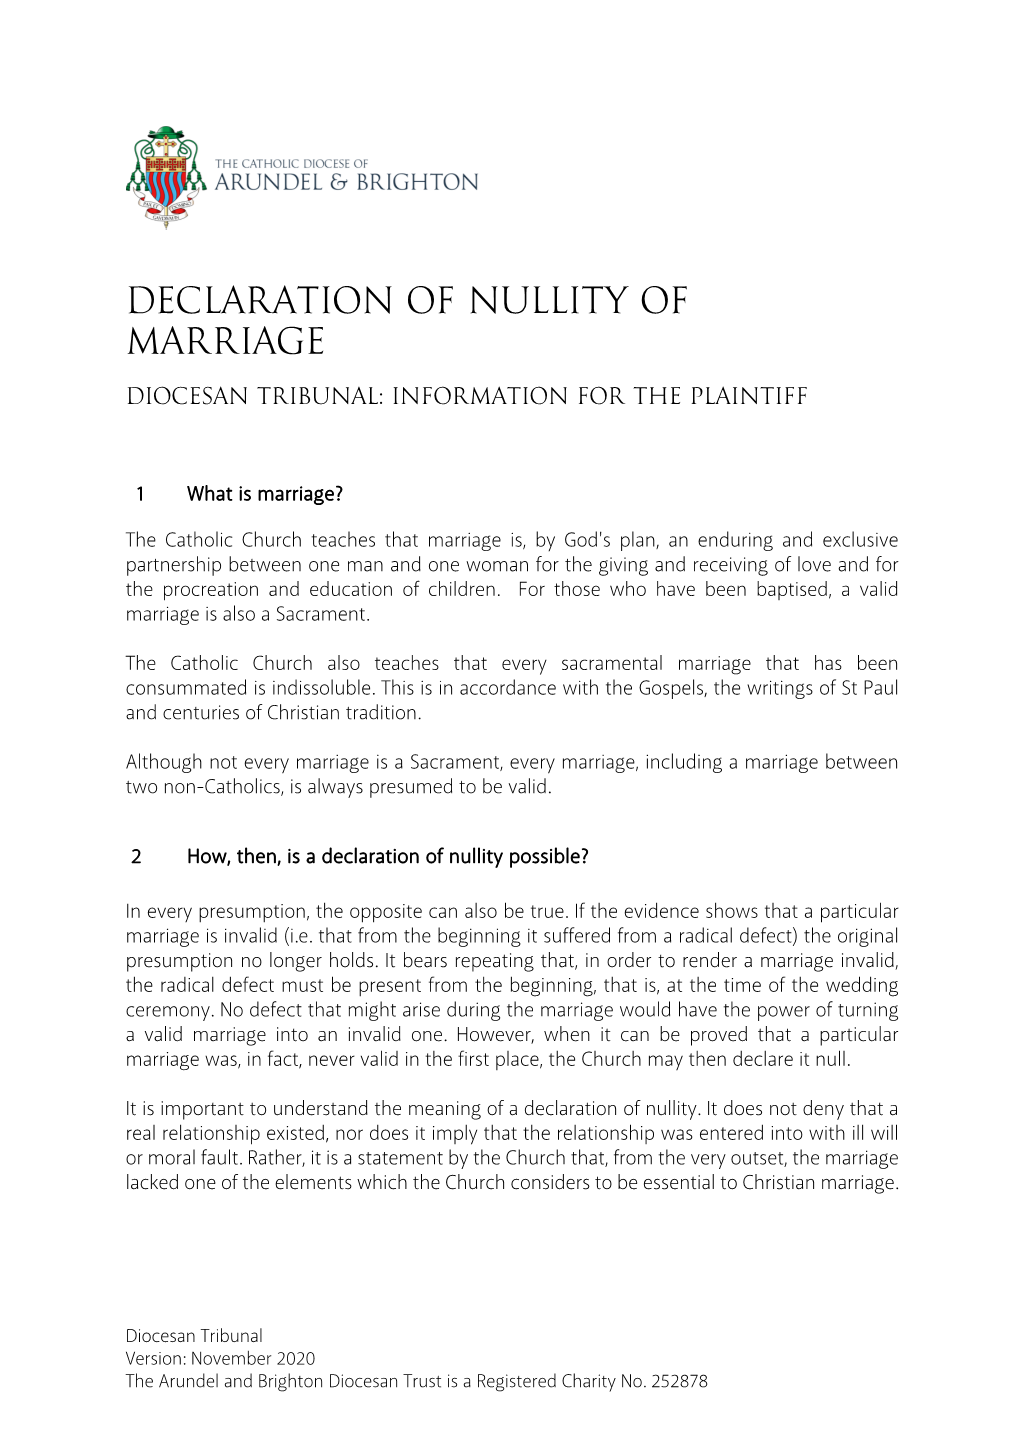 Declaration of Nullity of Marriage